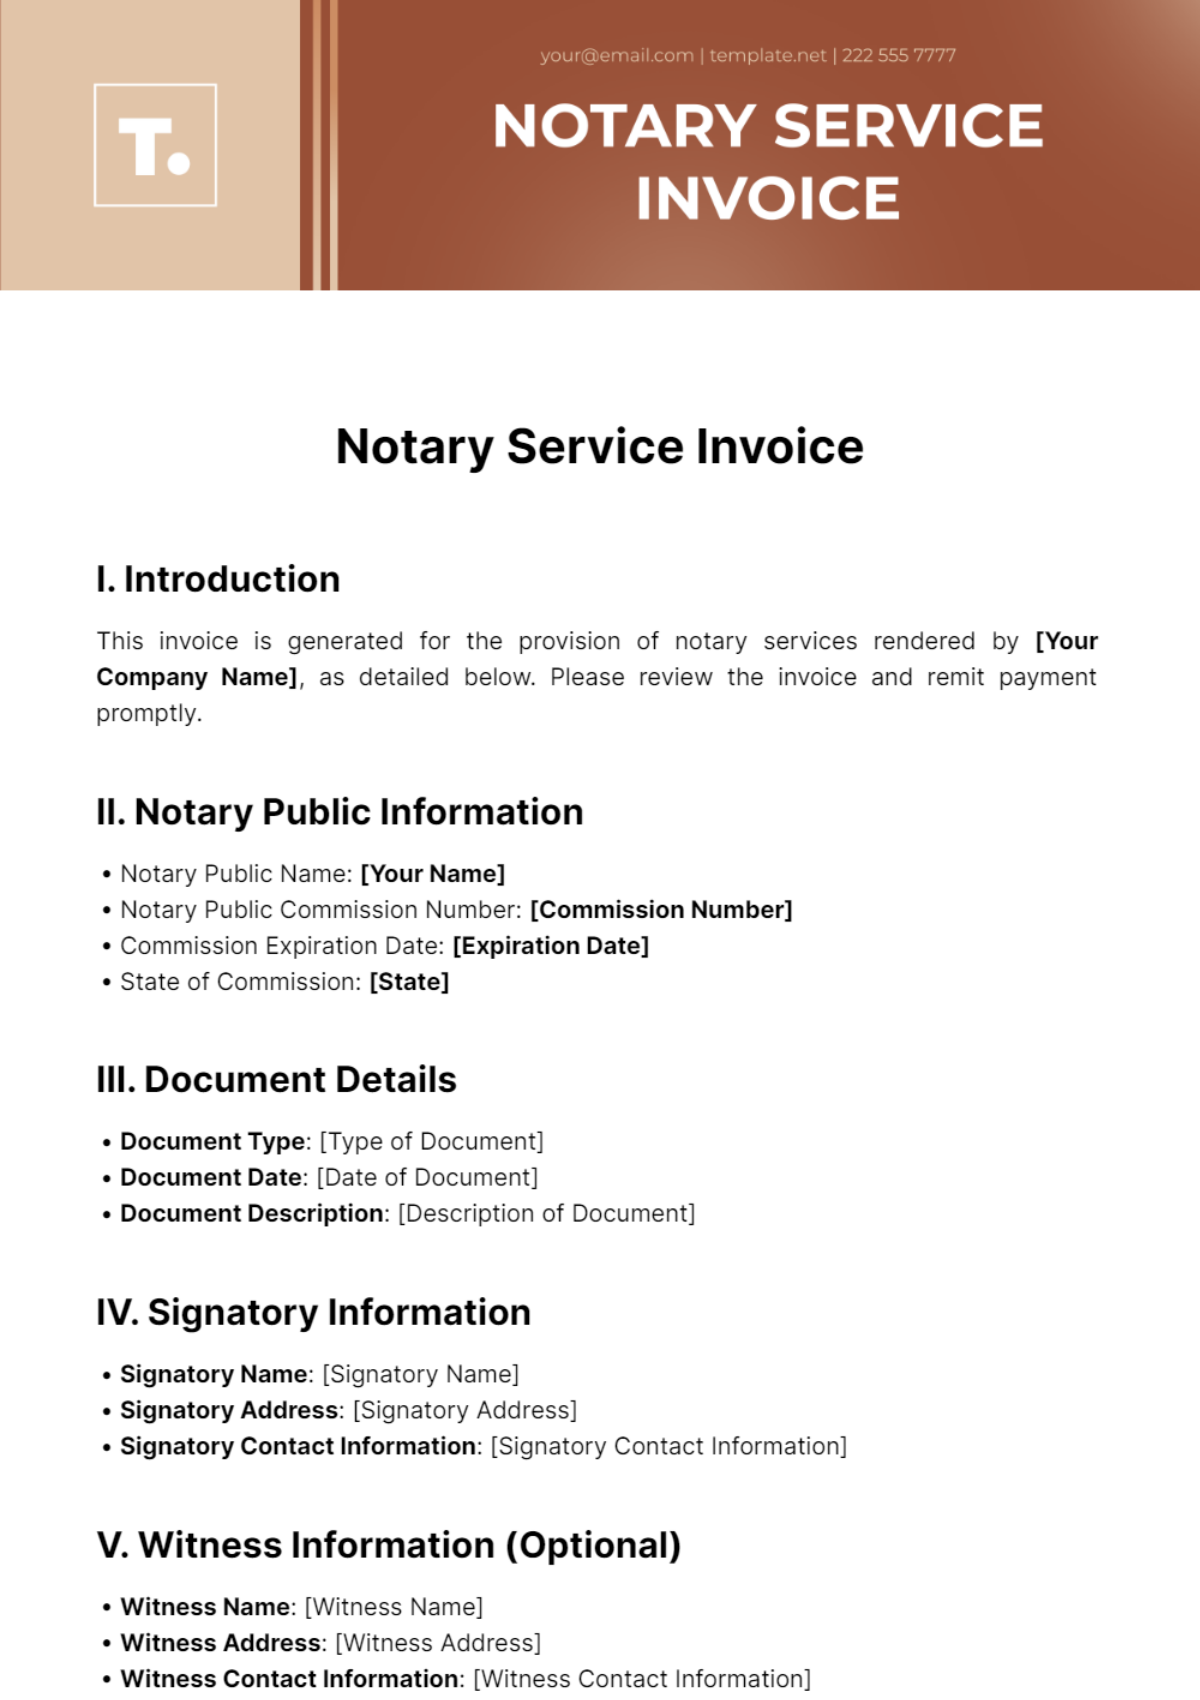 Free Notary Service Invoice Template